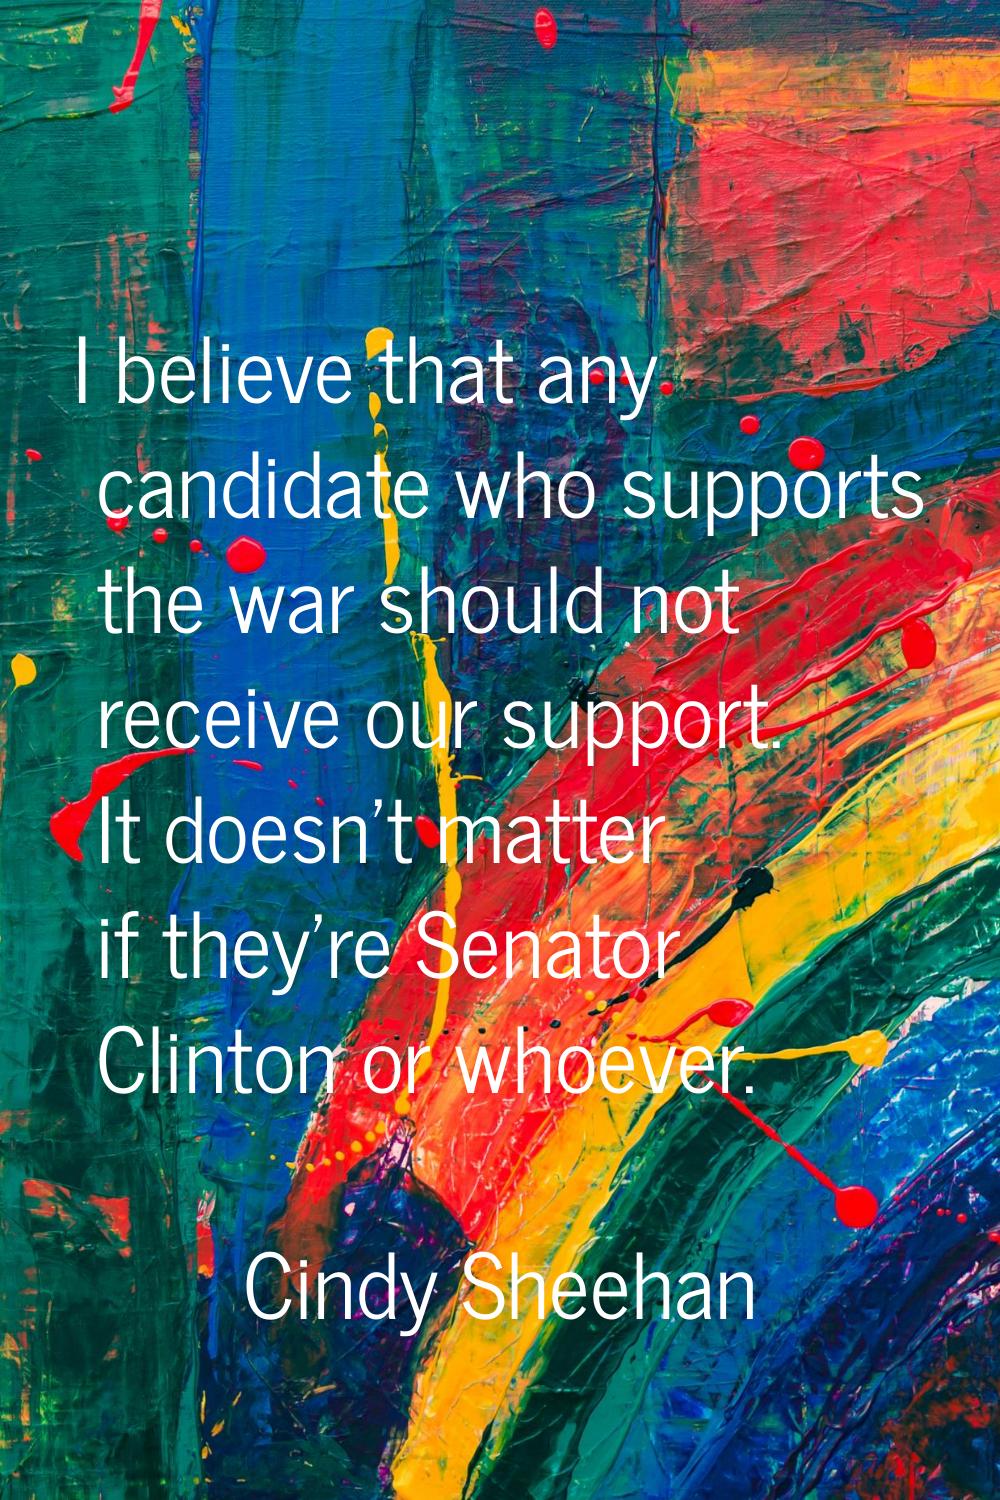 I believe that any candidate who supports the war should not receive our support. It doesn't matter